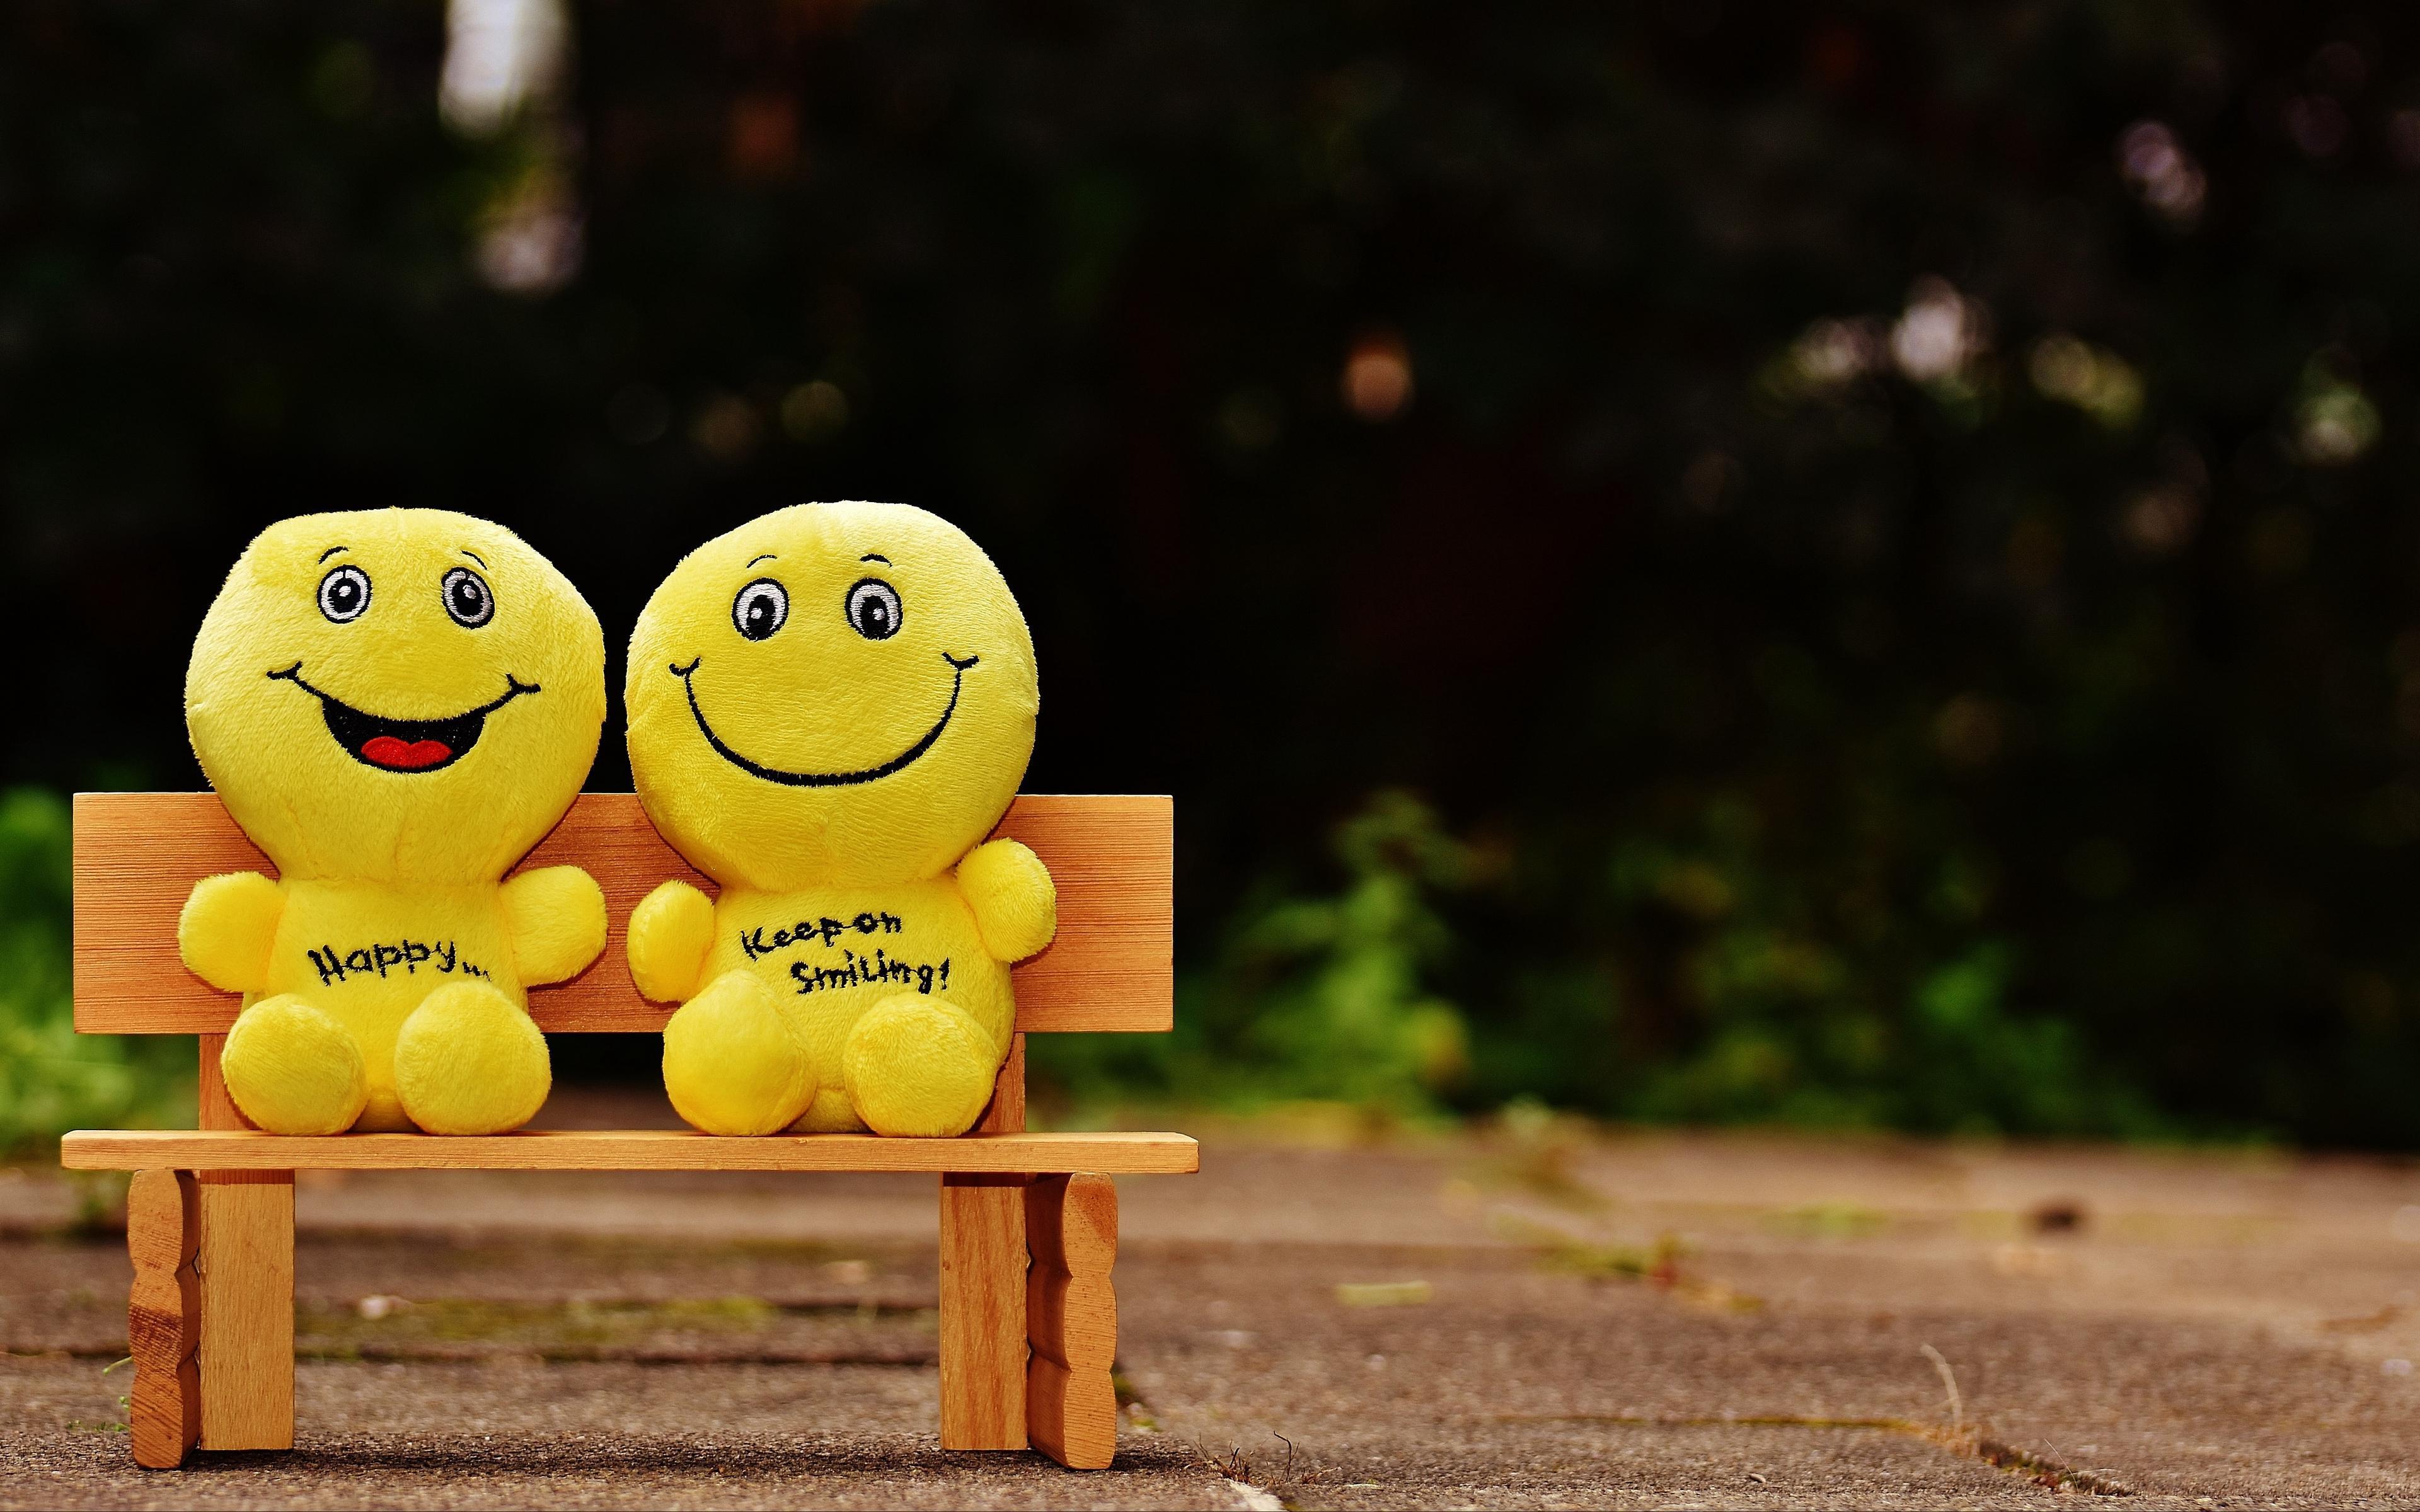 Cute Smile - Smiley Ball Wallpaper Download | MobCup